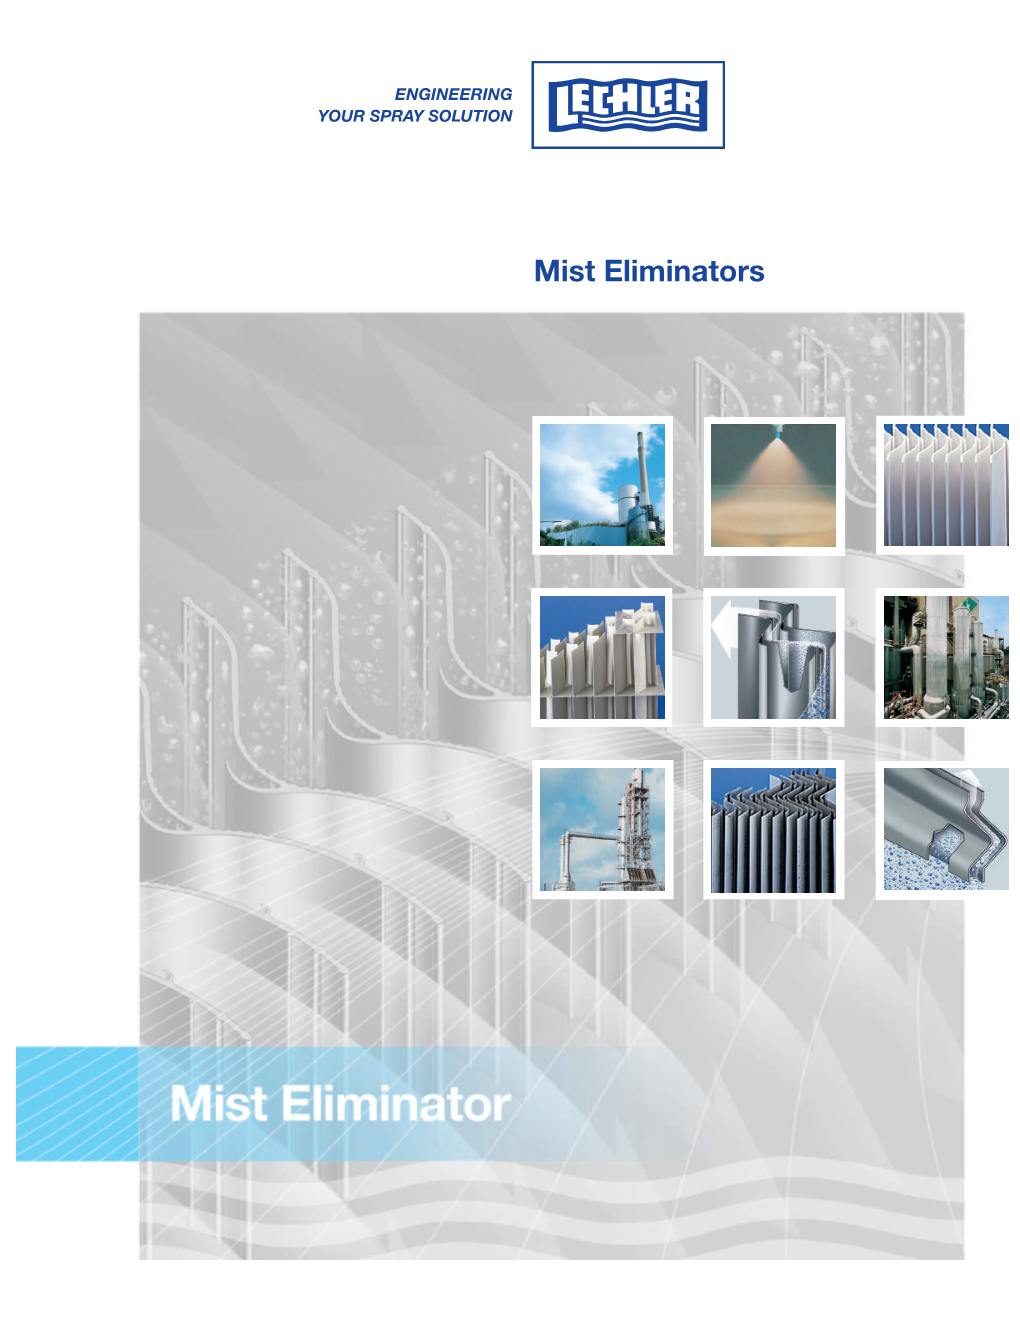 Made-To-Measure Solutions Mist Eliminators from Lechler